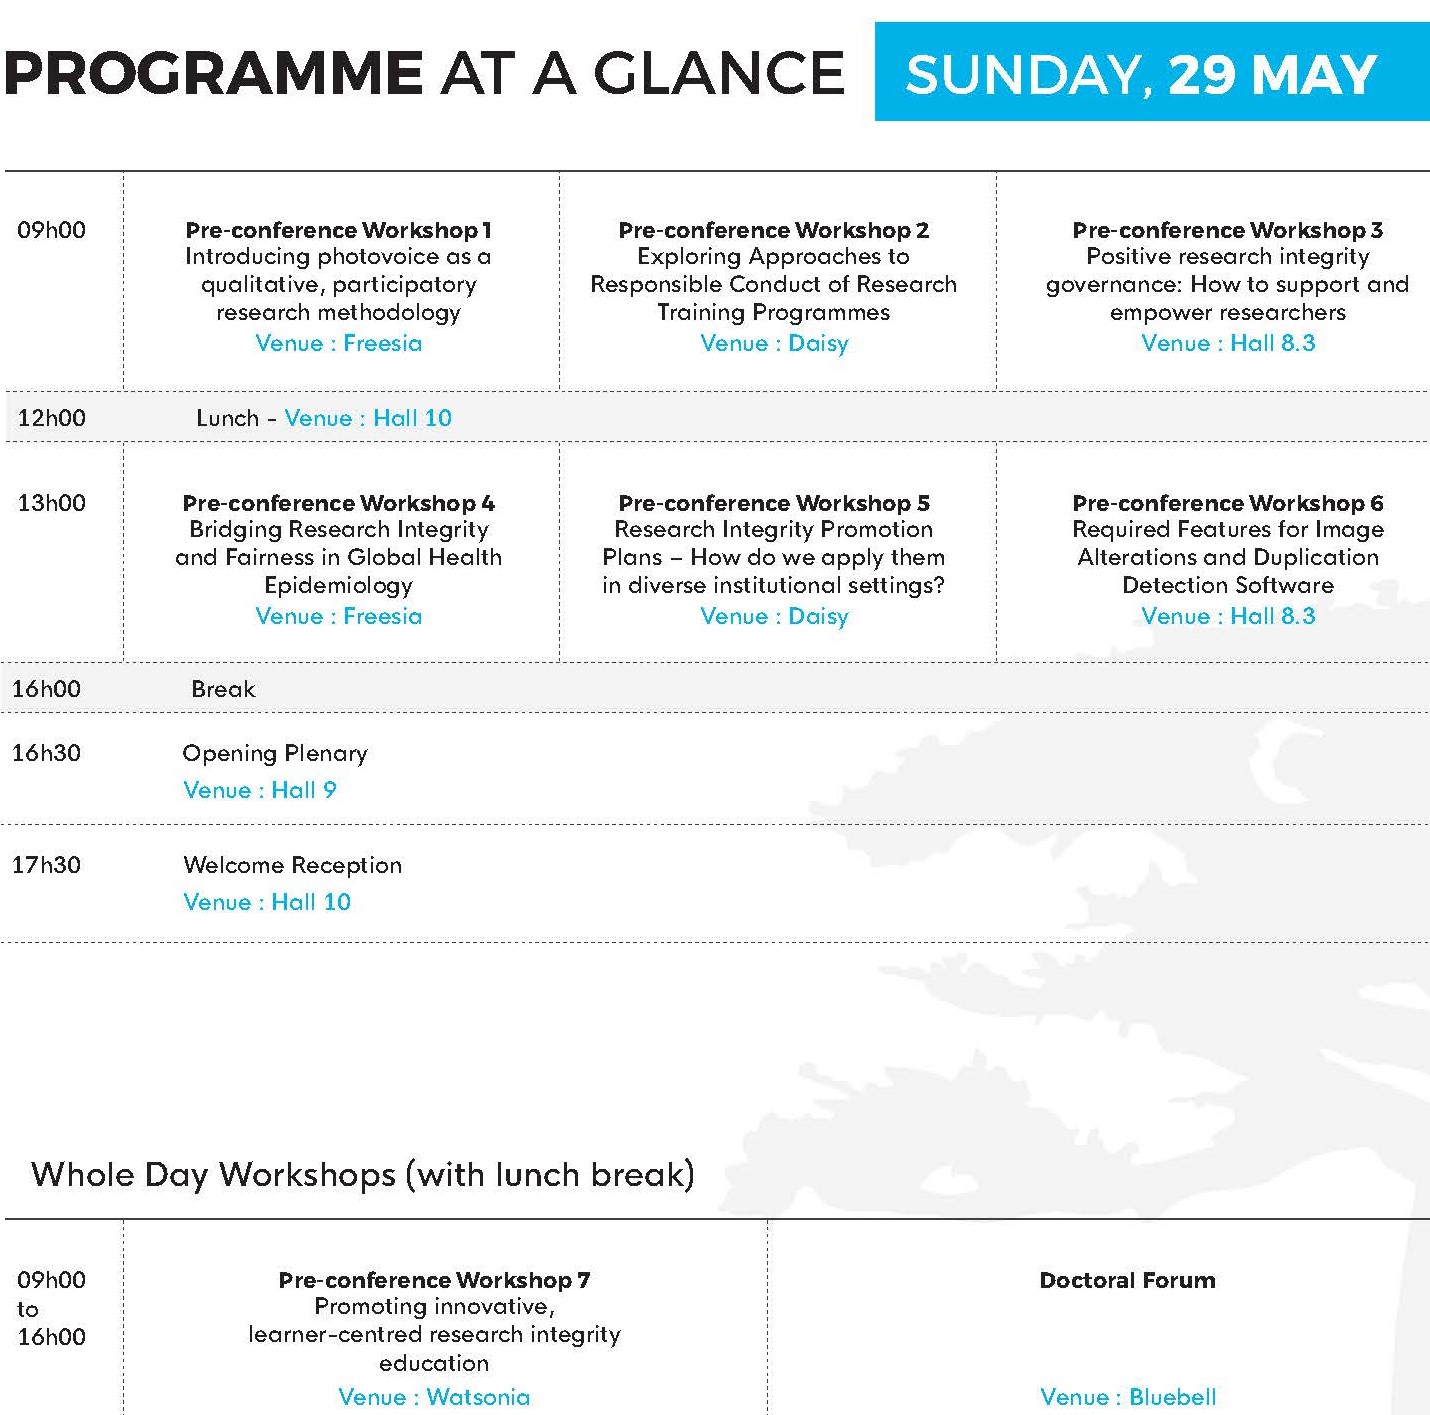 Programme at a Glance